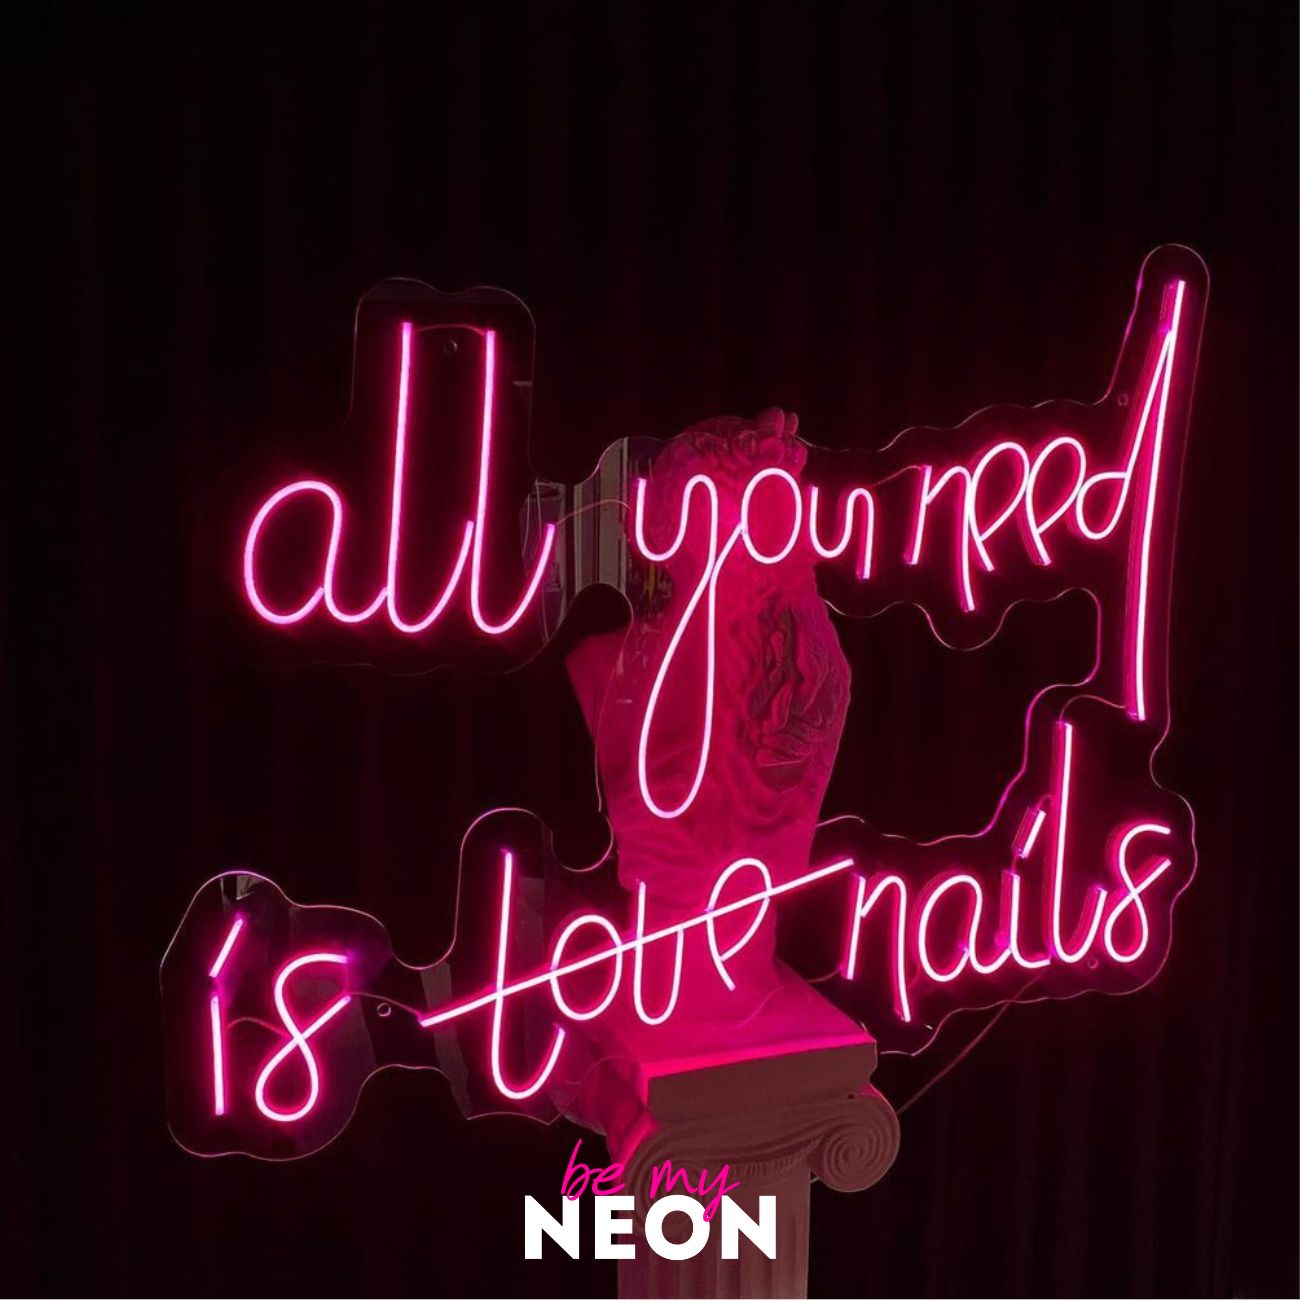 "all you need is love nails" LED Neonschild